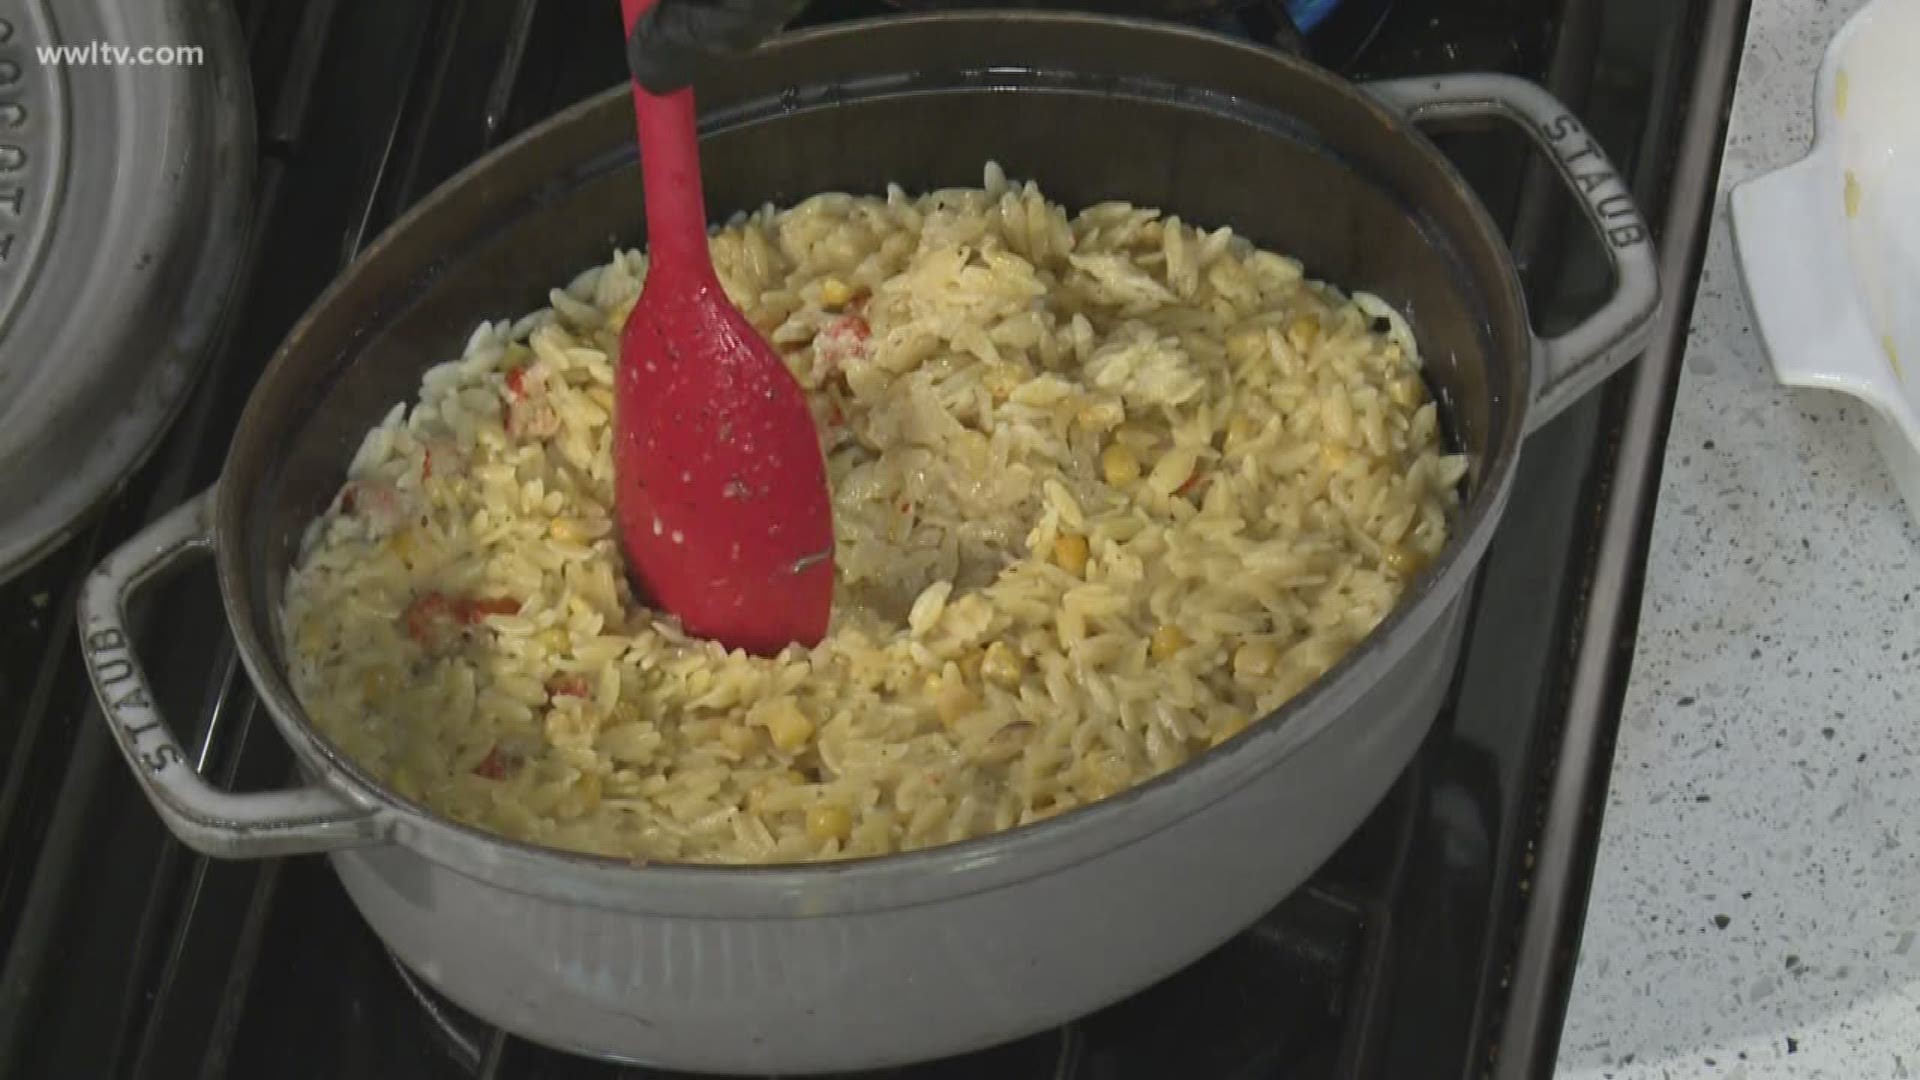 Creole inspired dish form the Sunday morning cooking segment made with crawfish, shrimp, noodles and more!